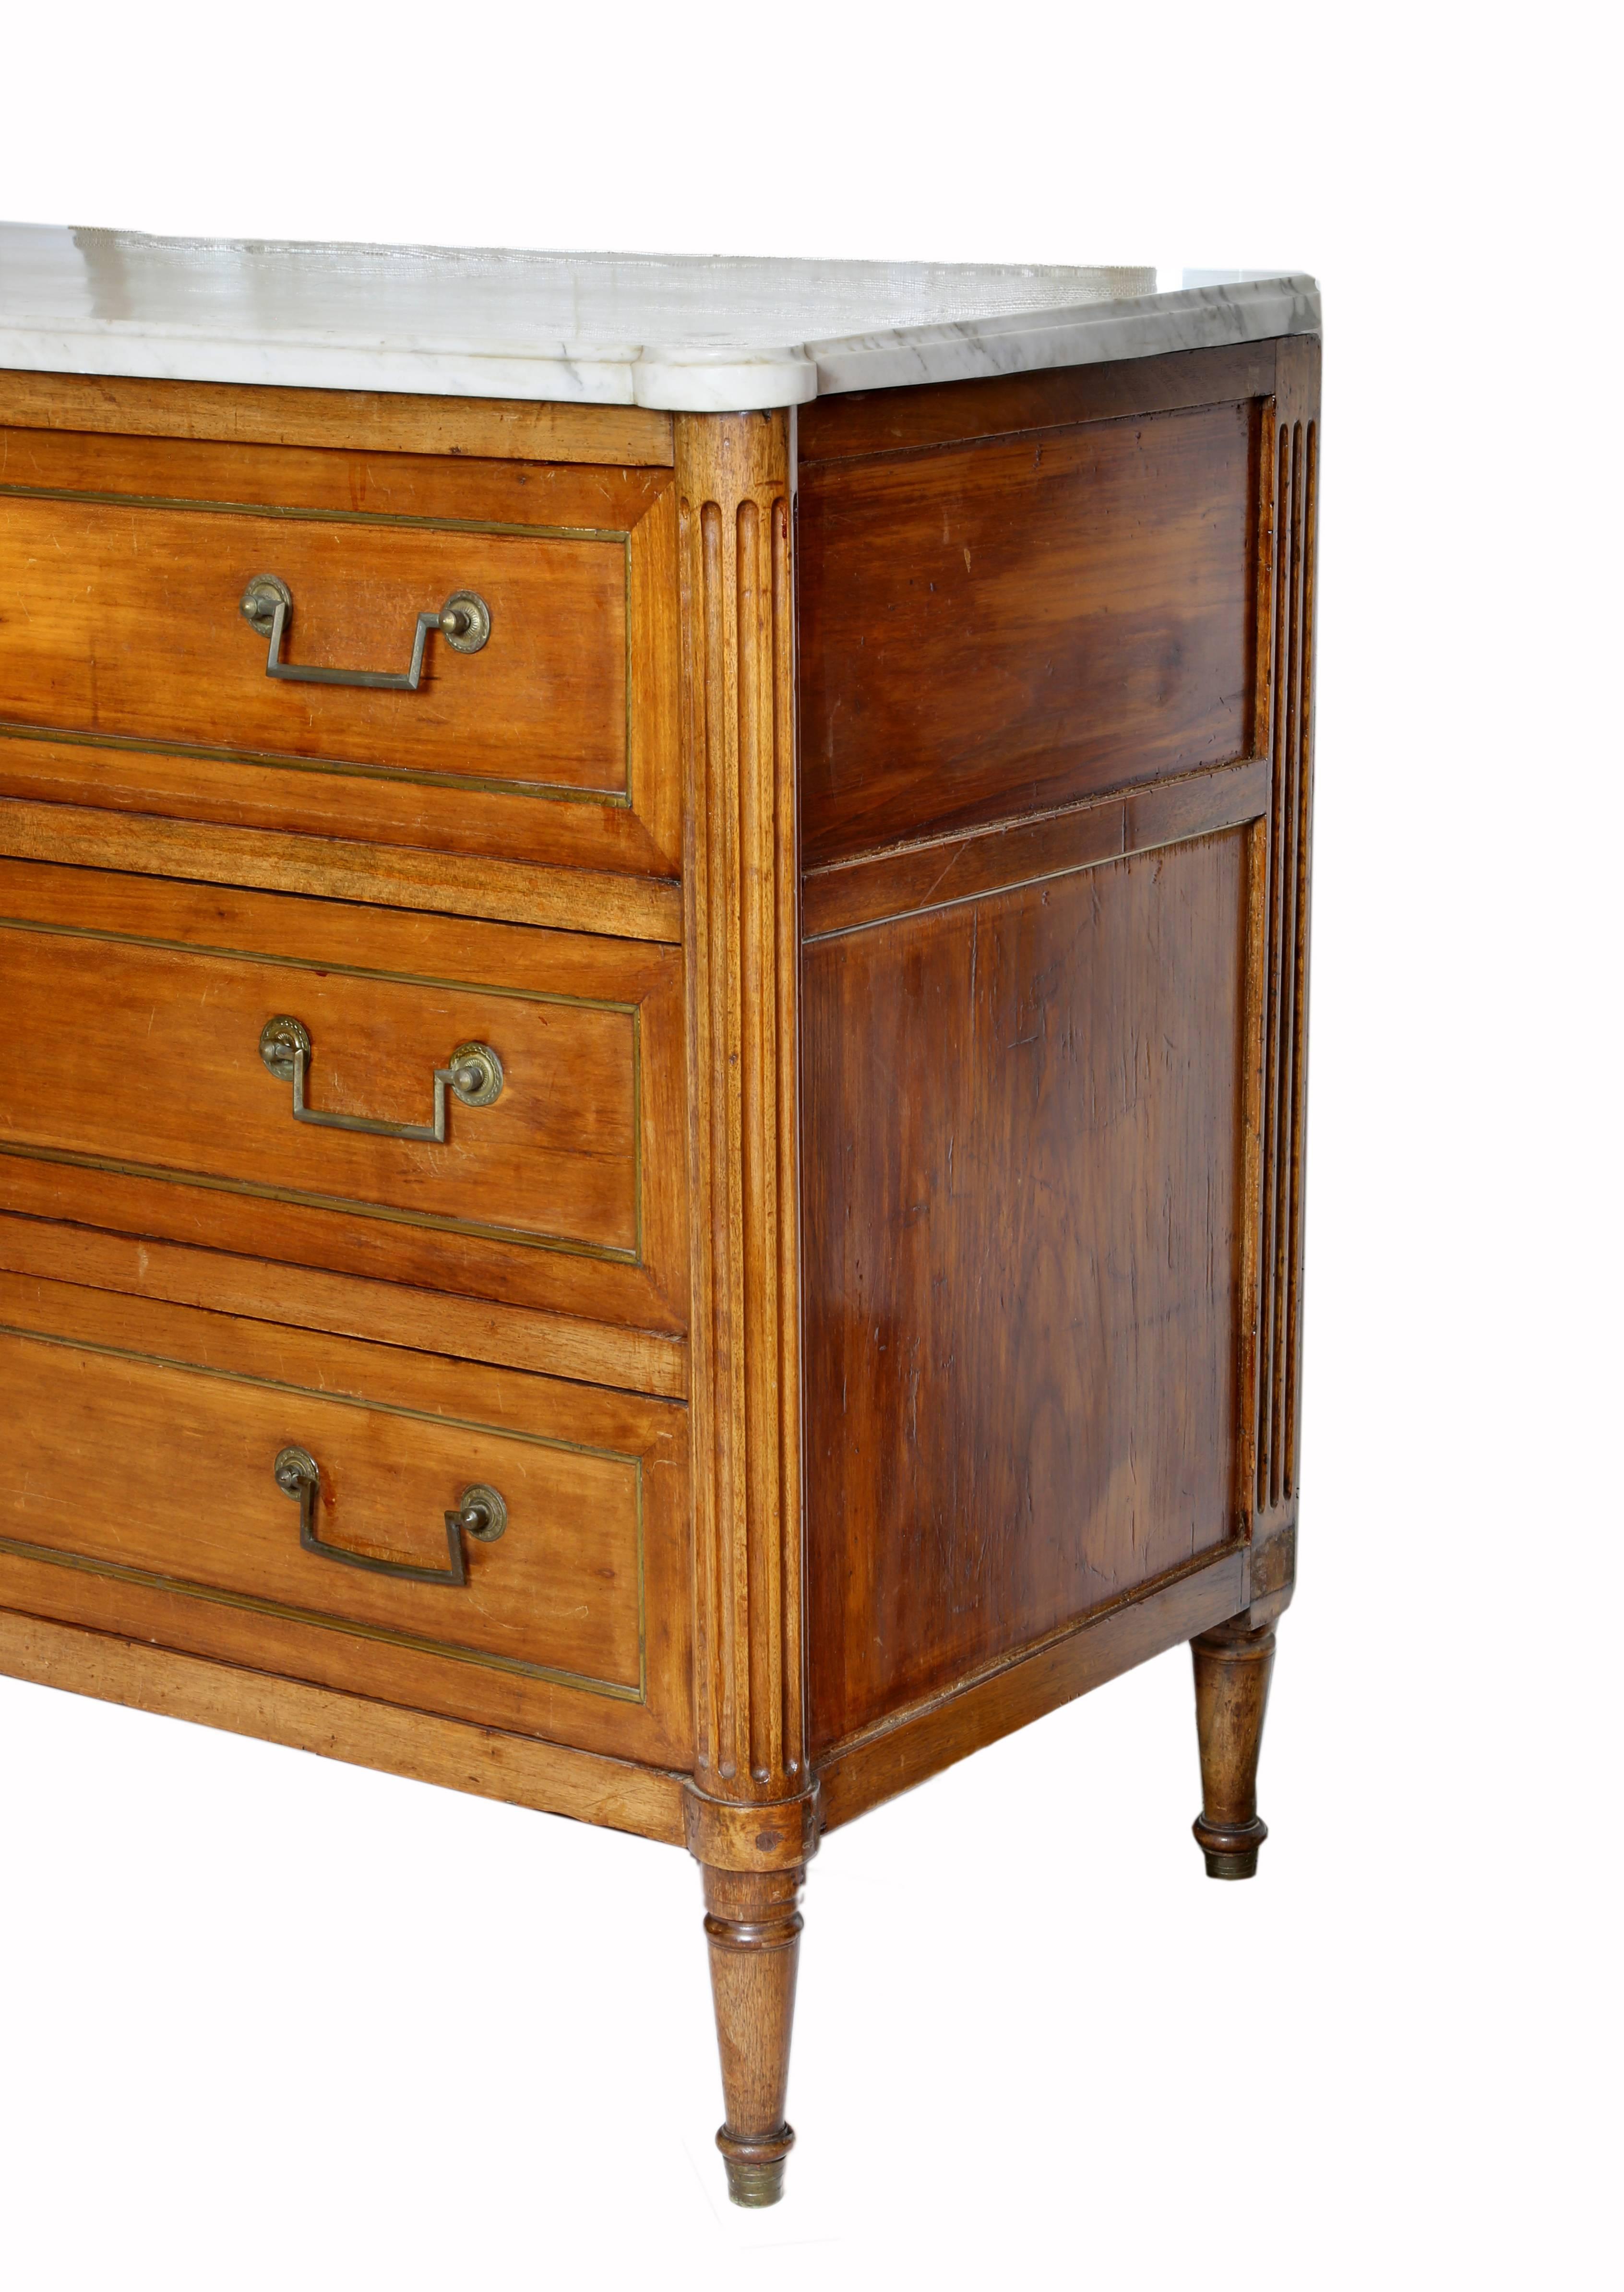 Directoire style commode or buffet in cherrywood with a shaped marble top over
a conforming body. The sides are fluted and the piece is fitted with three drawers rising on turned tapered legs.